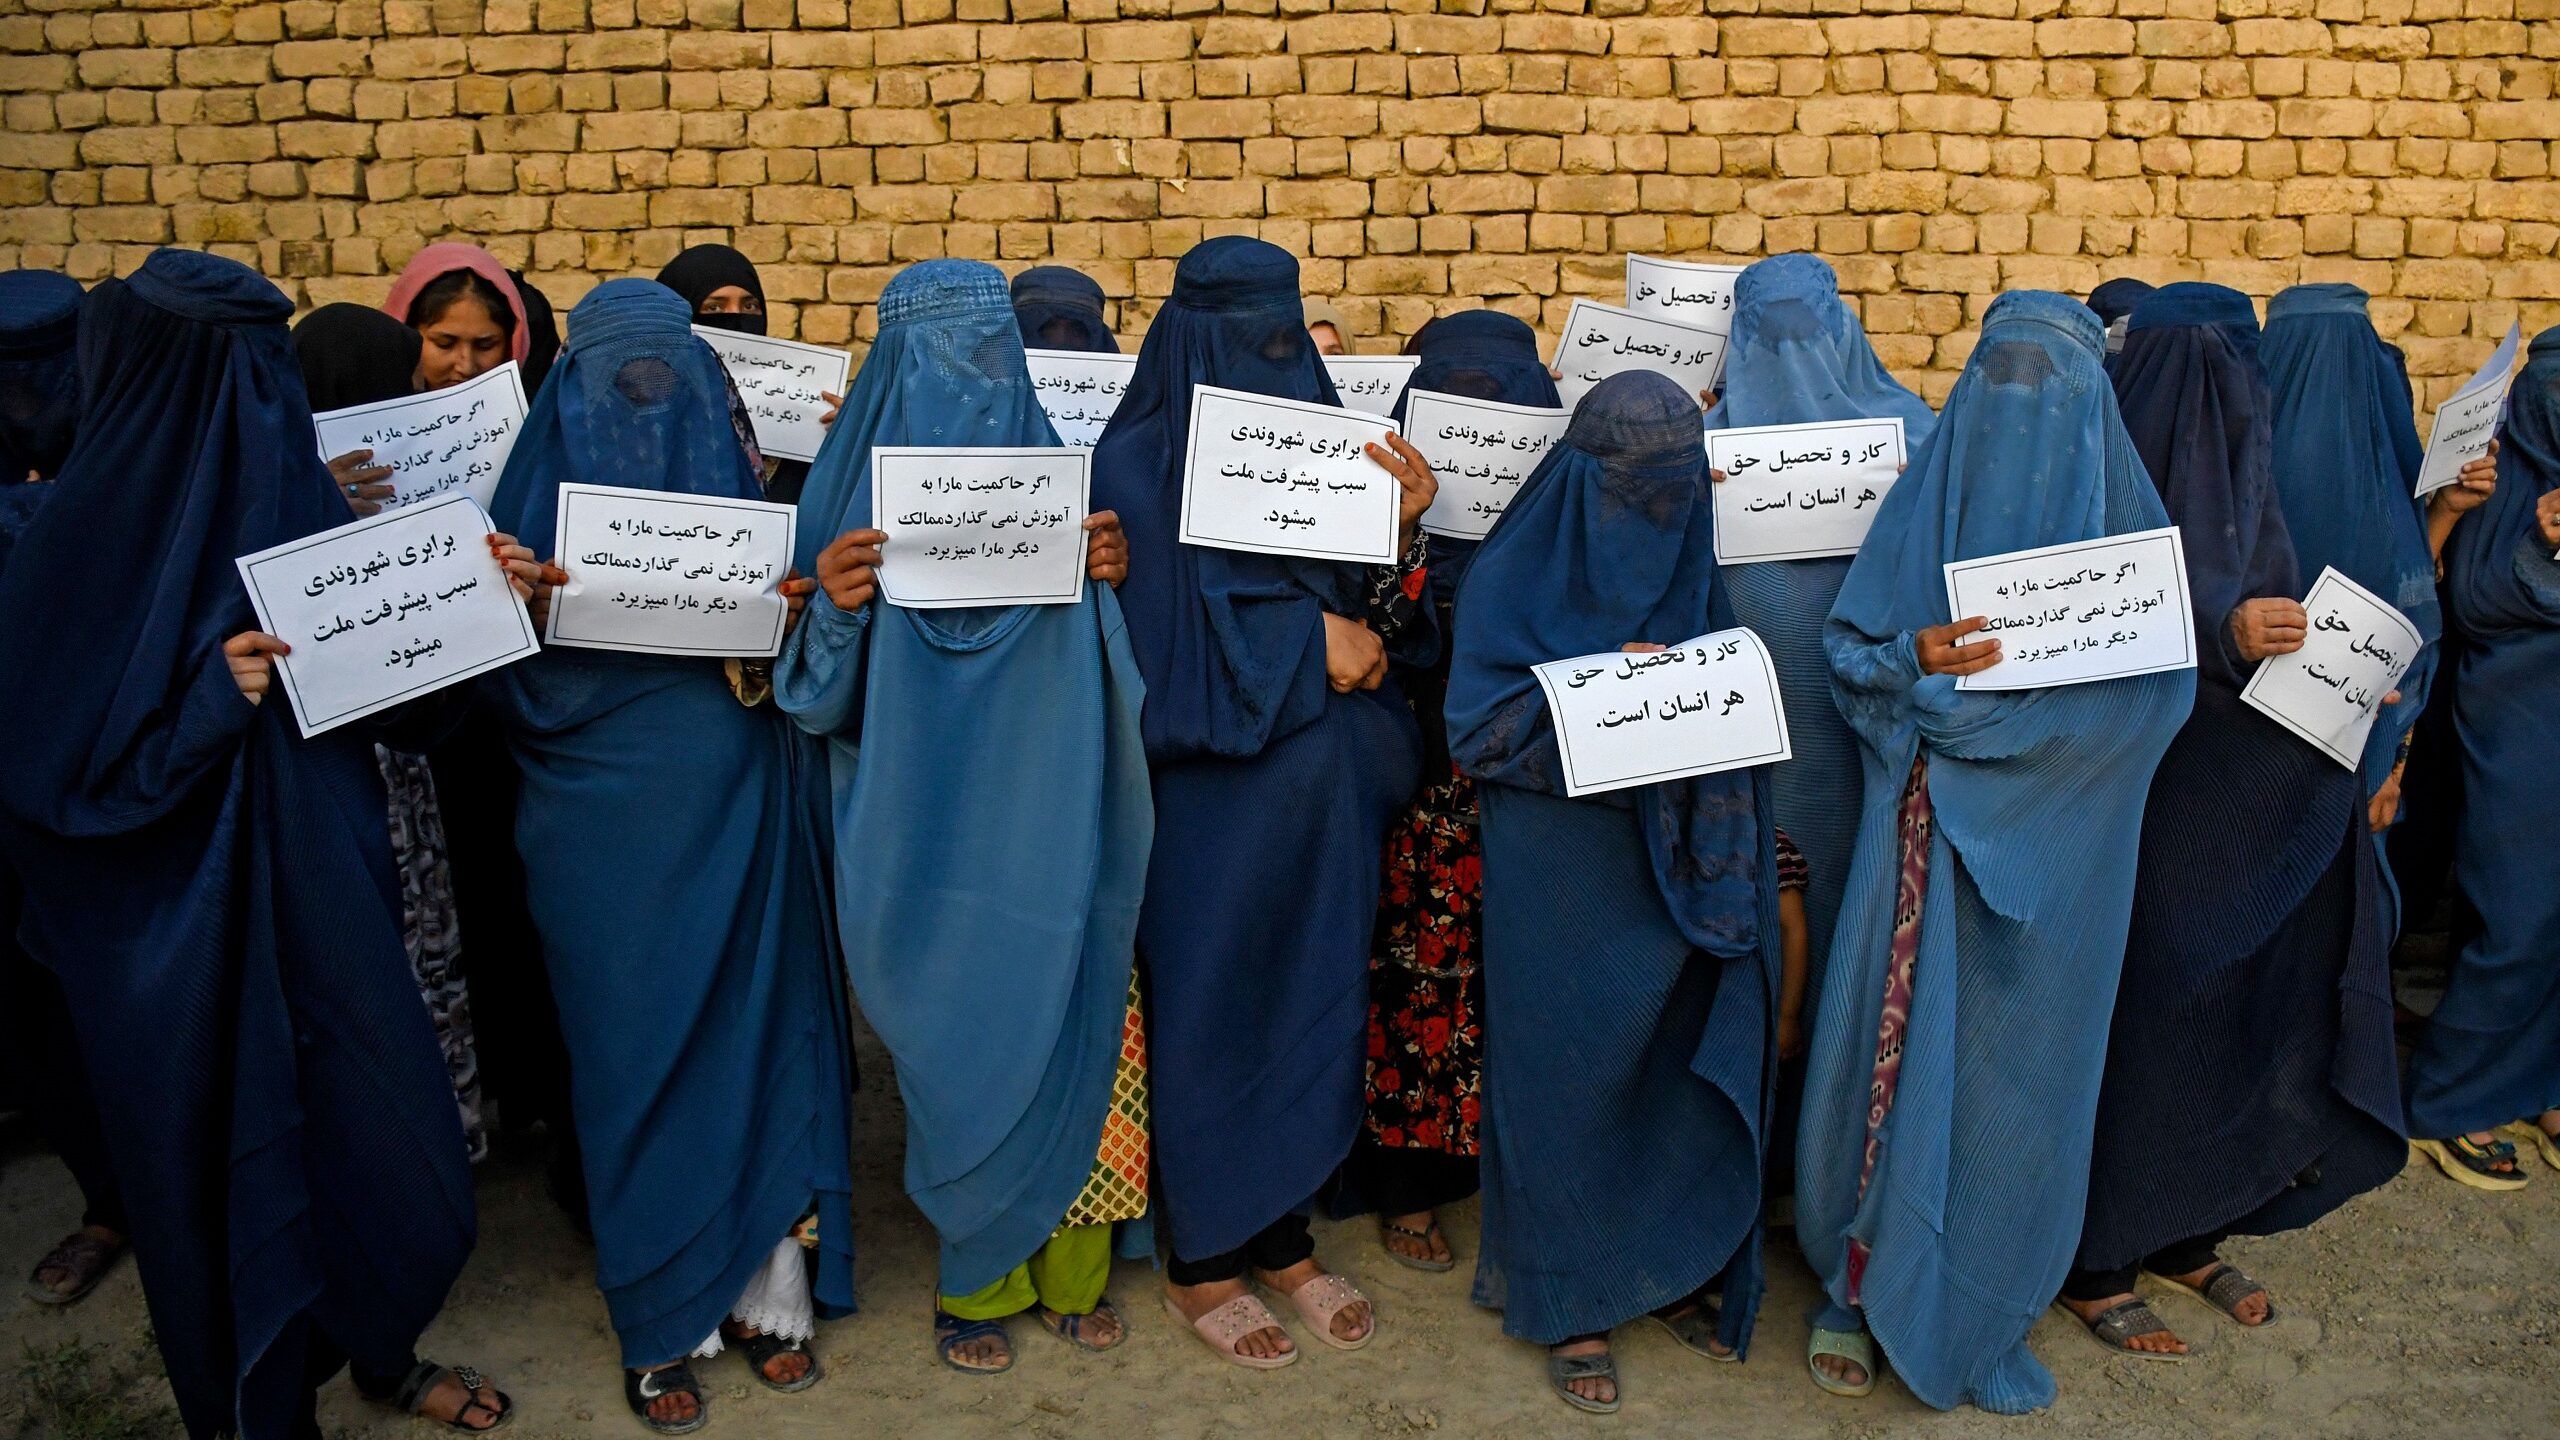 2 Years Into Taliban’s Rule: Afghan Women Barred From Working, Study in the Shadows